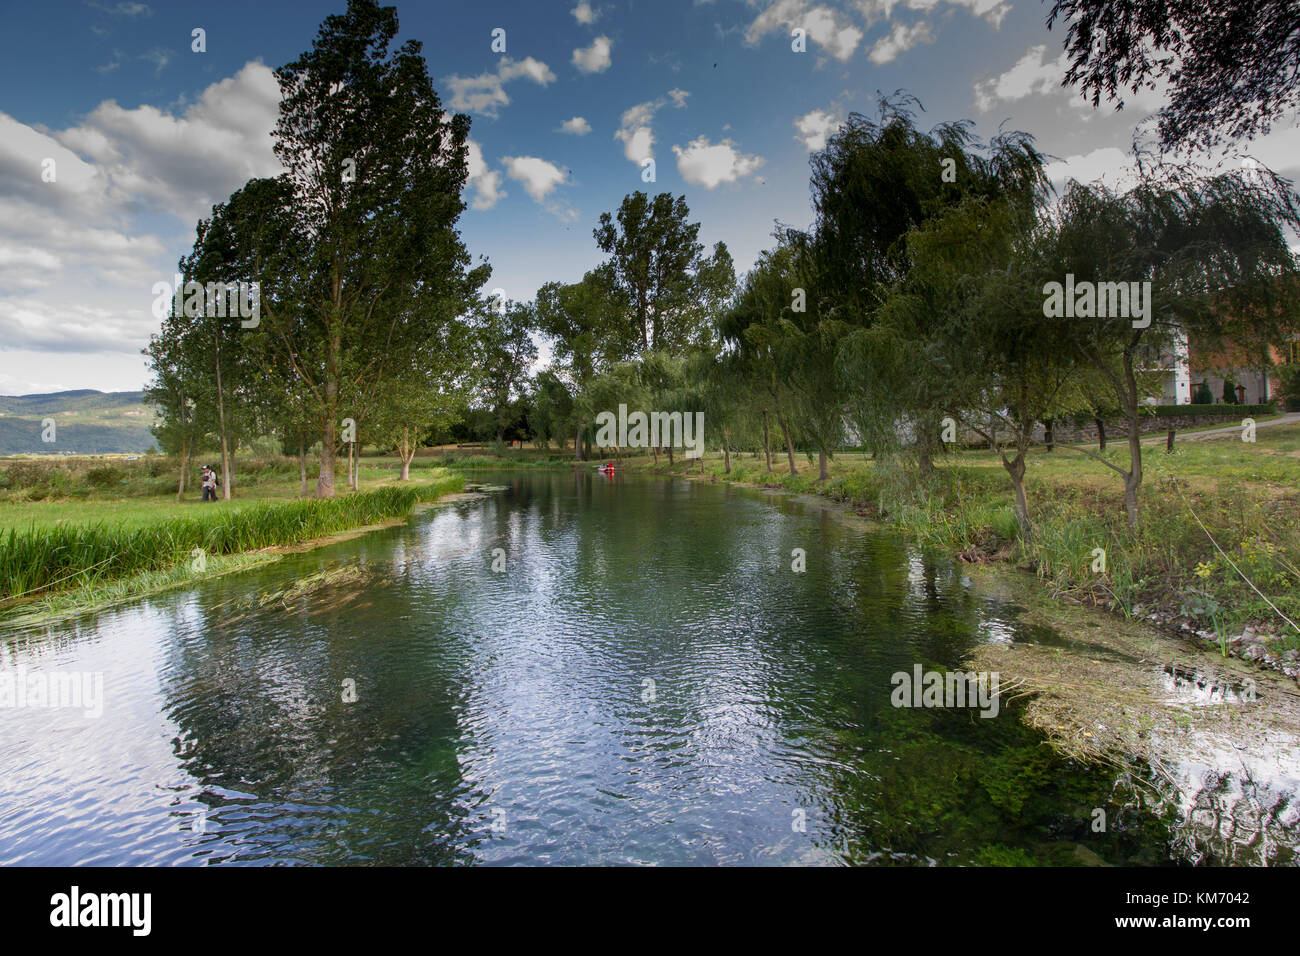 River Gacka with willow trees and a small red rowingbiat near Otocac, Croatia Stock Photo